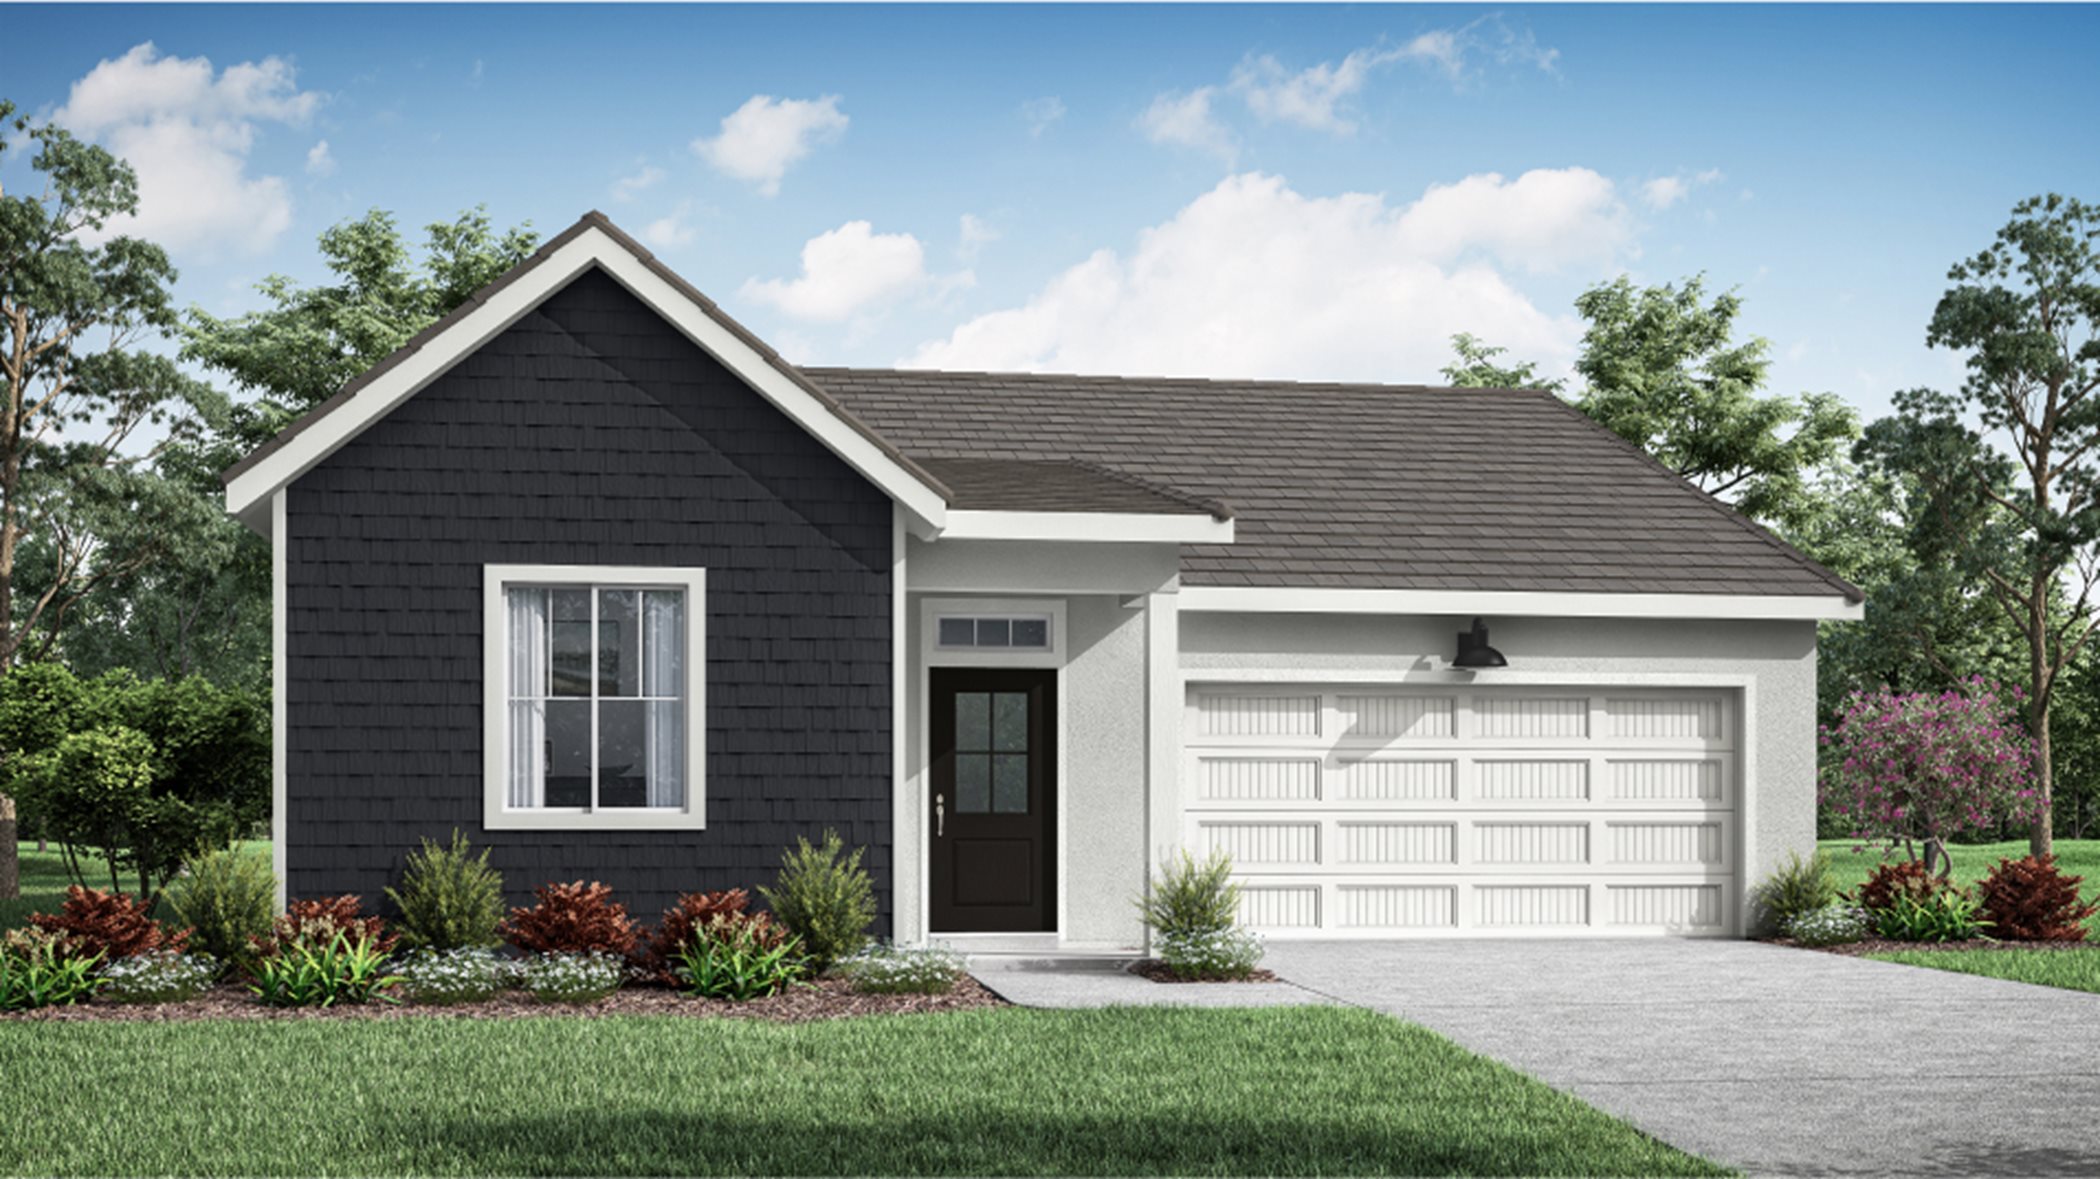 Exterior B home rendering image